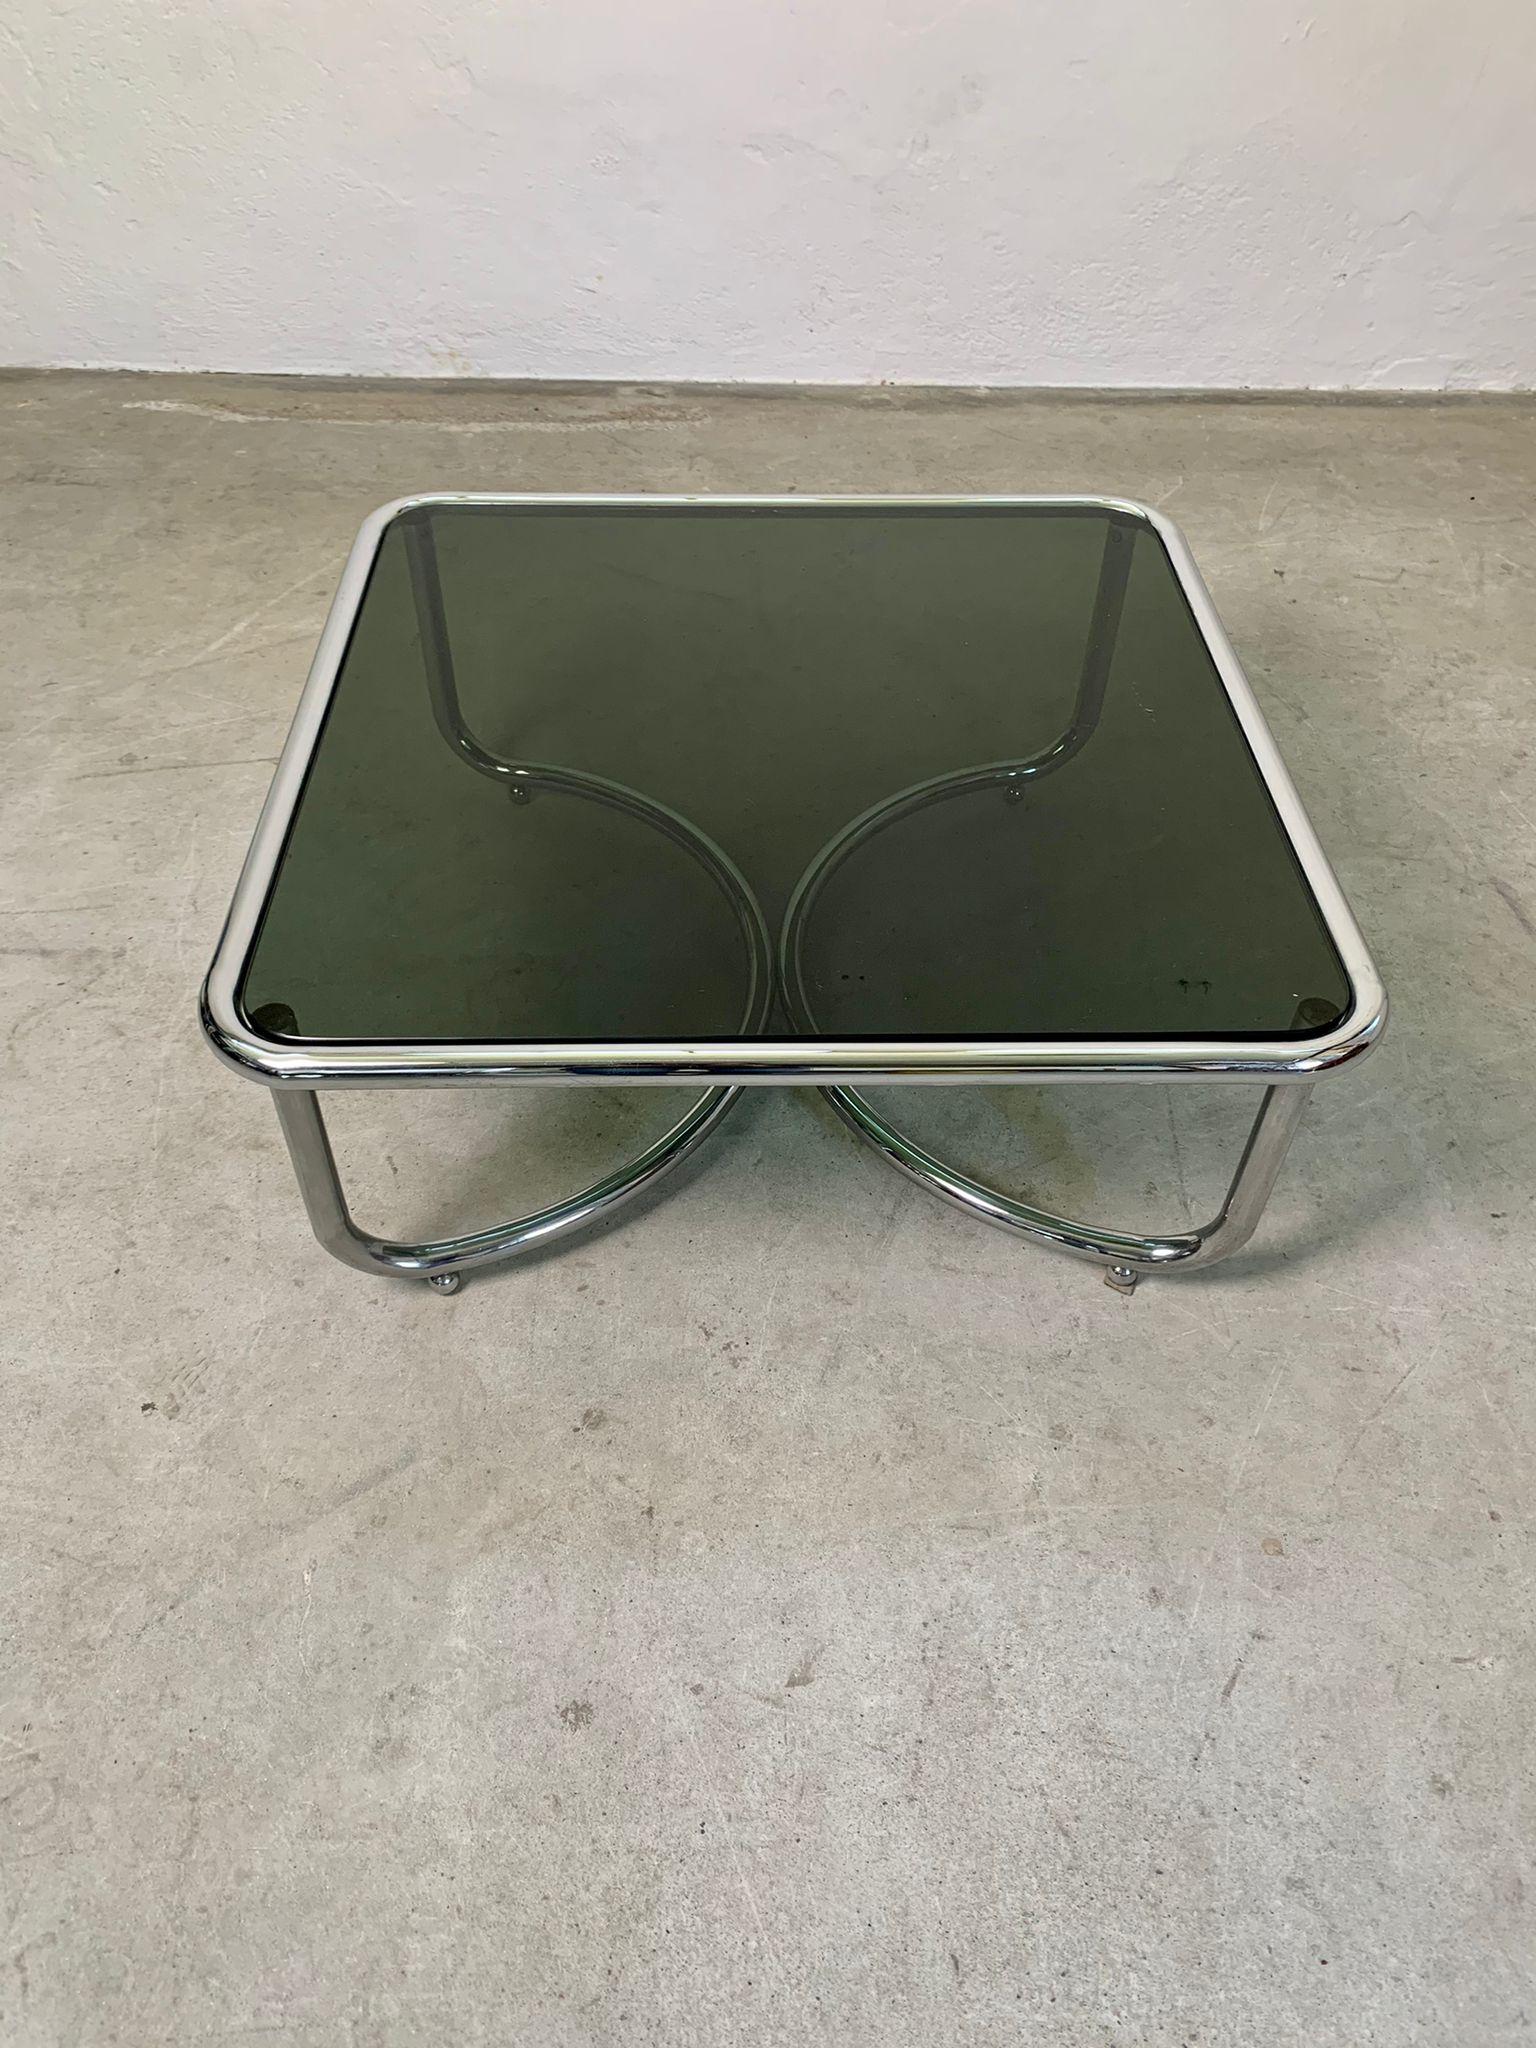 Low table with smoked glass top and chromed steel frame by Gae Aulenti for Poltronova, 1964

Low table with smoked glass top and chromed steel frame with wheels. Beautiful model made by Gae aulenti for Poltronova.